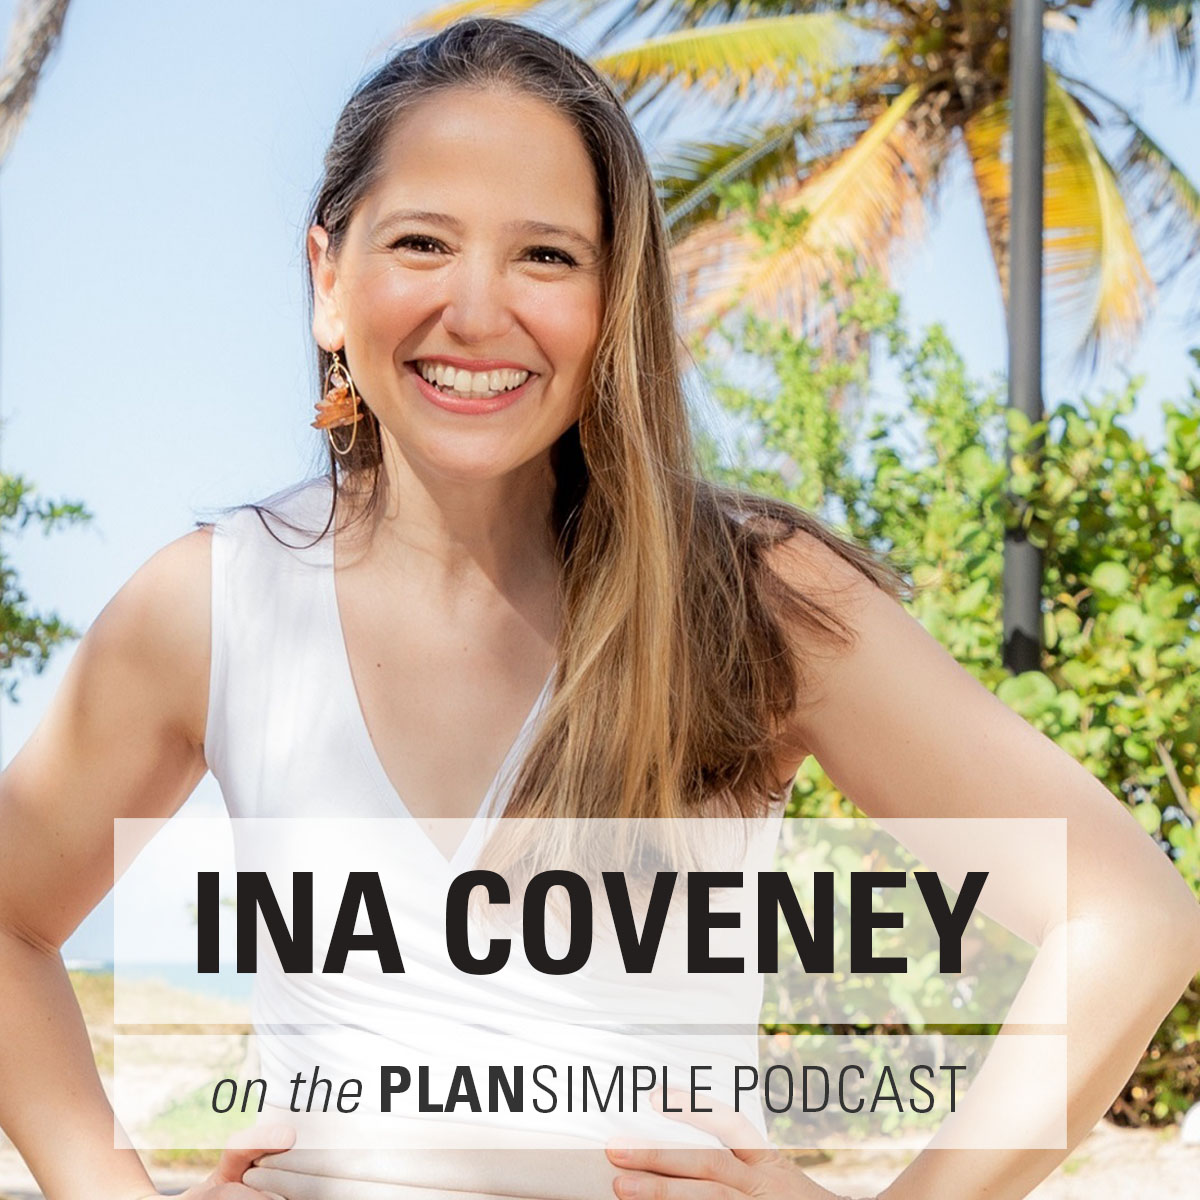 Become A Global Phenomenon Without A Large Following With Ina Coveney